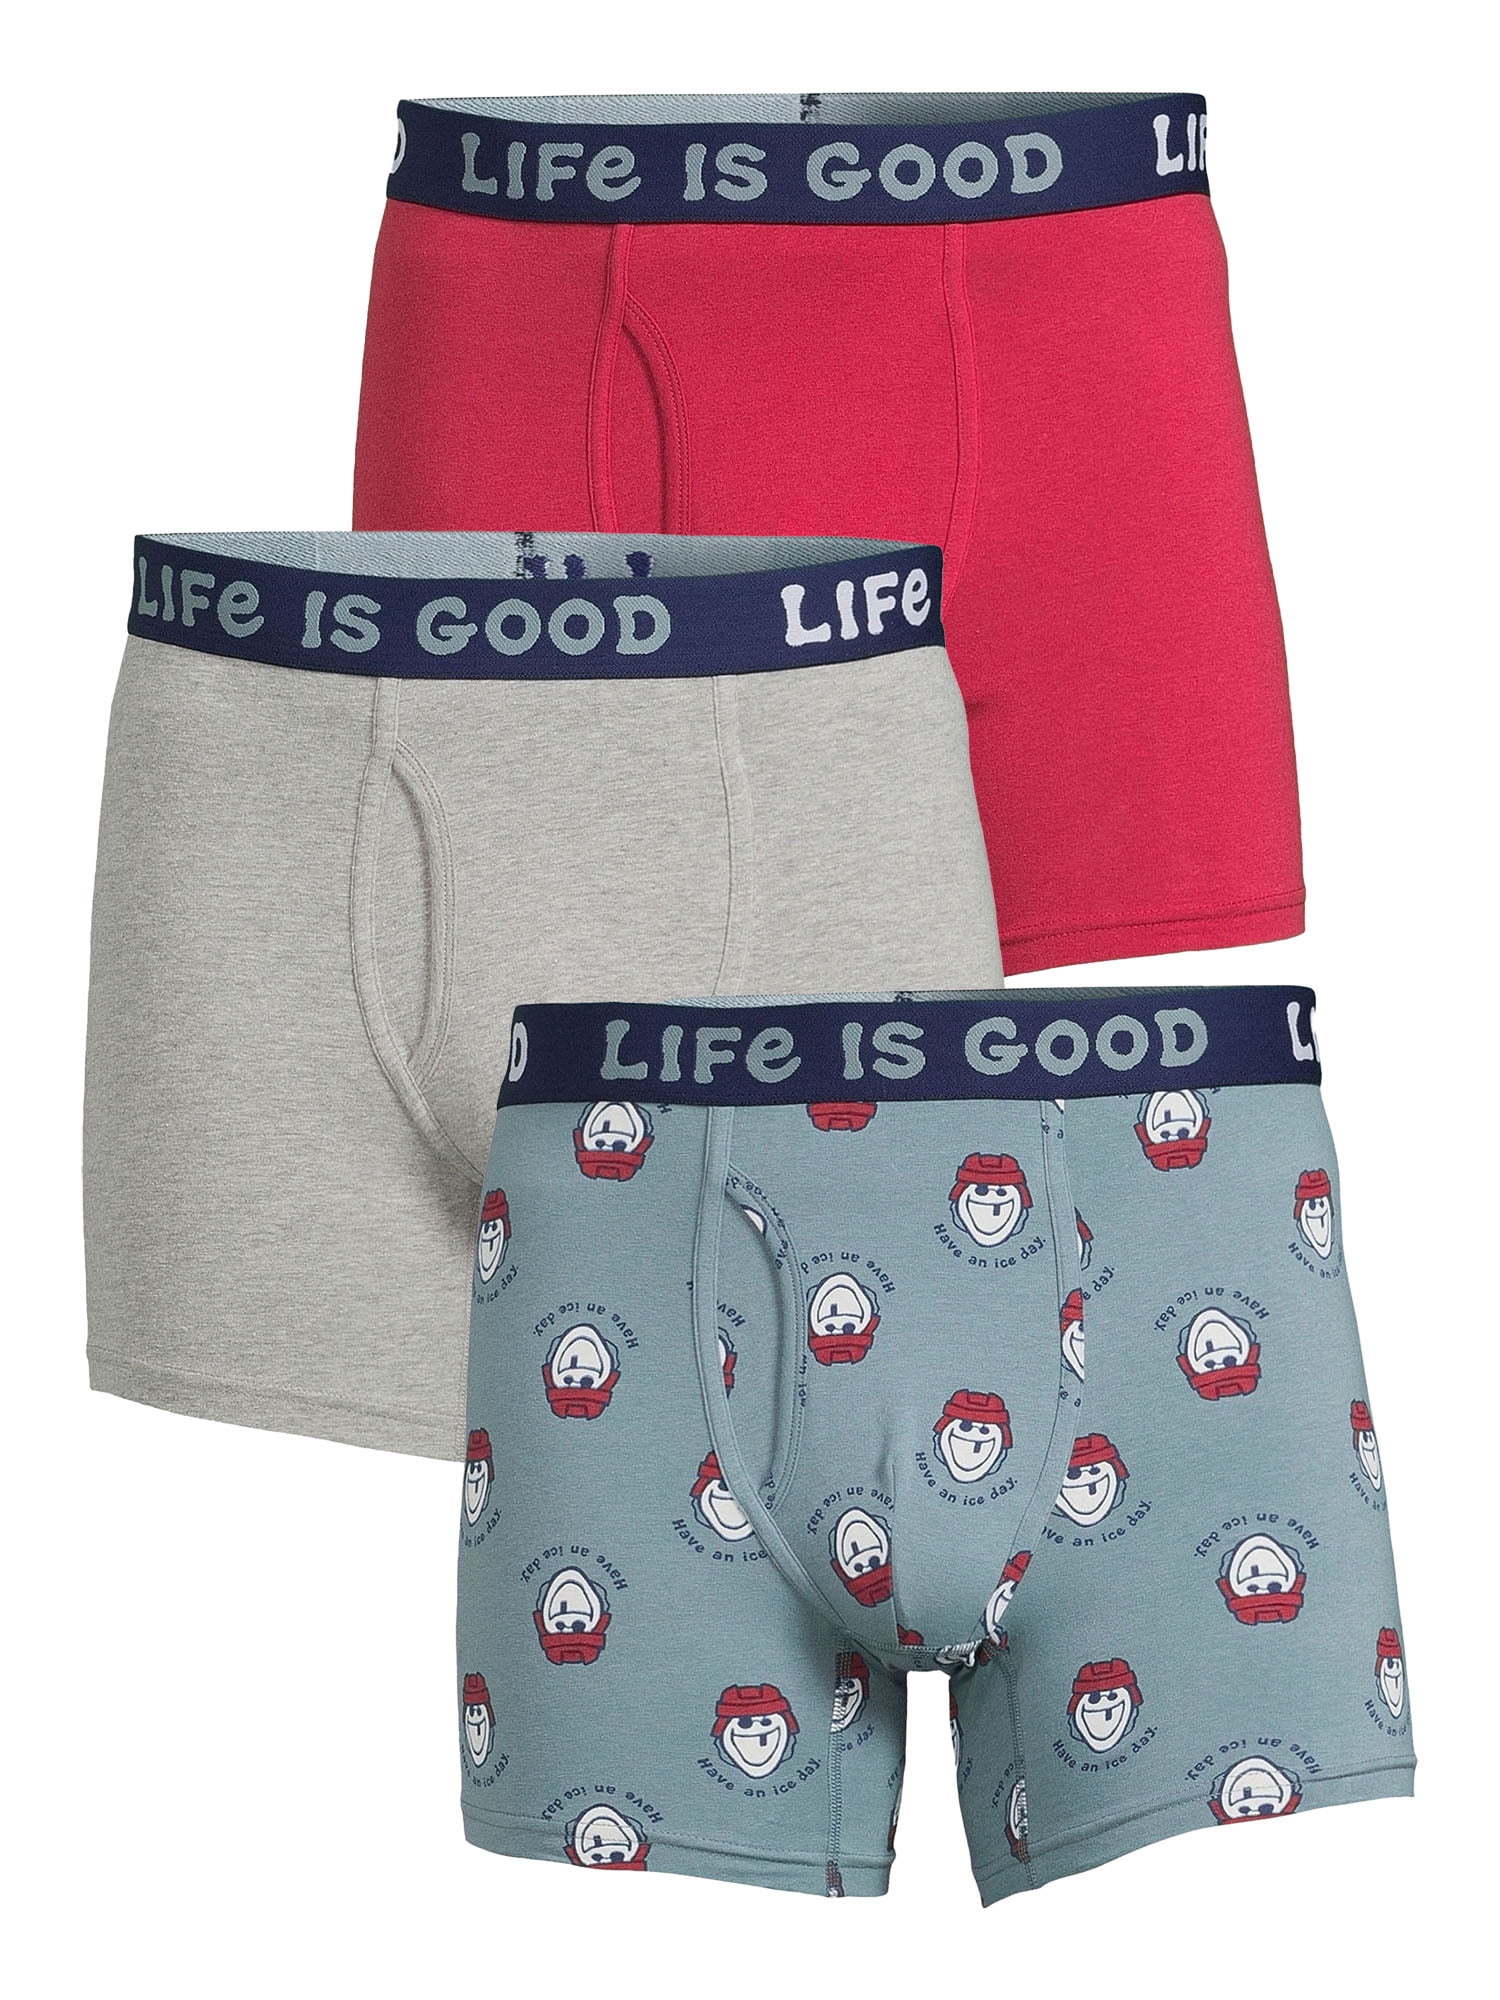 Life is Good Men's Stretch Boxer Briefs, 3-Pack 